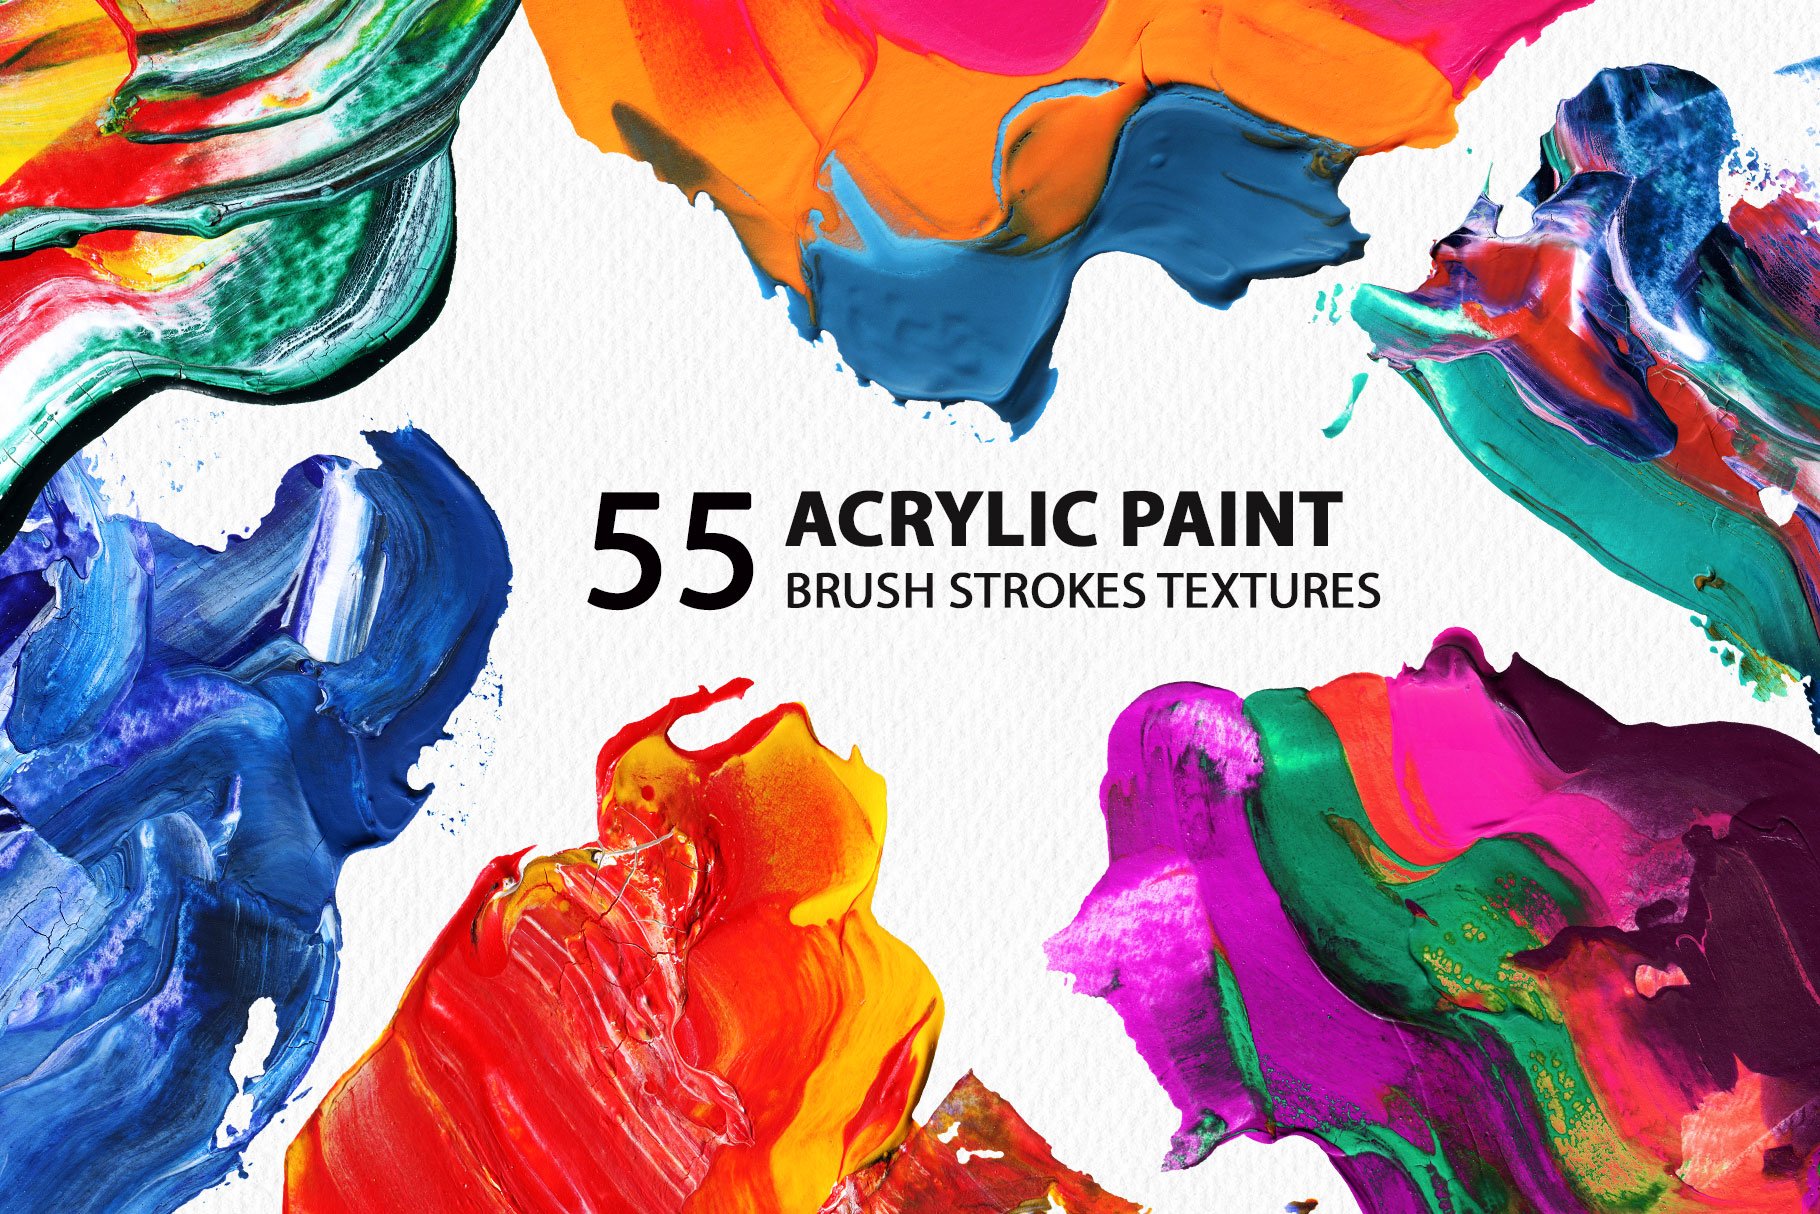 Acrylic Brush Strokes Textures cover image.